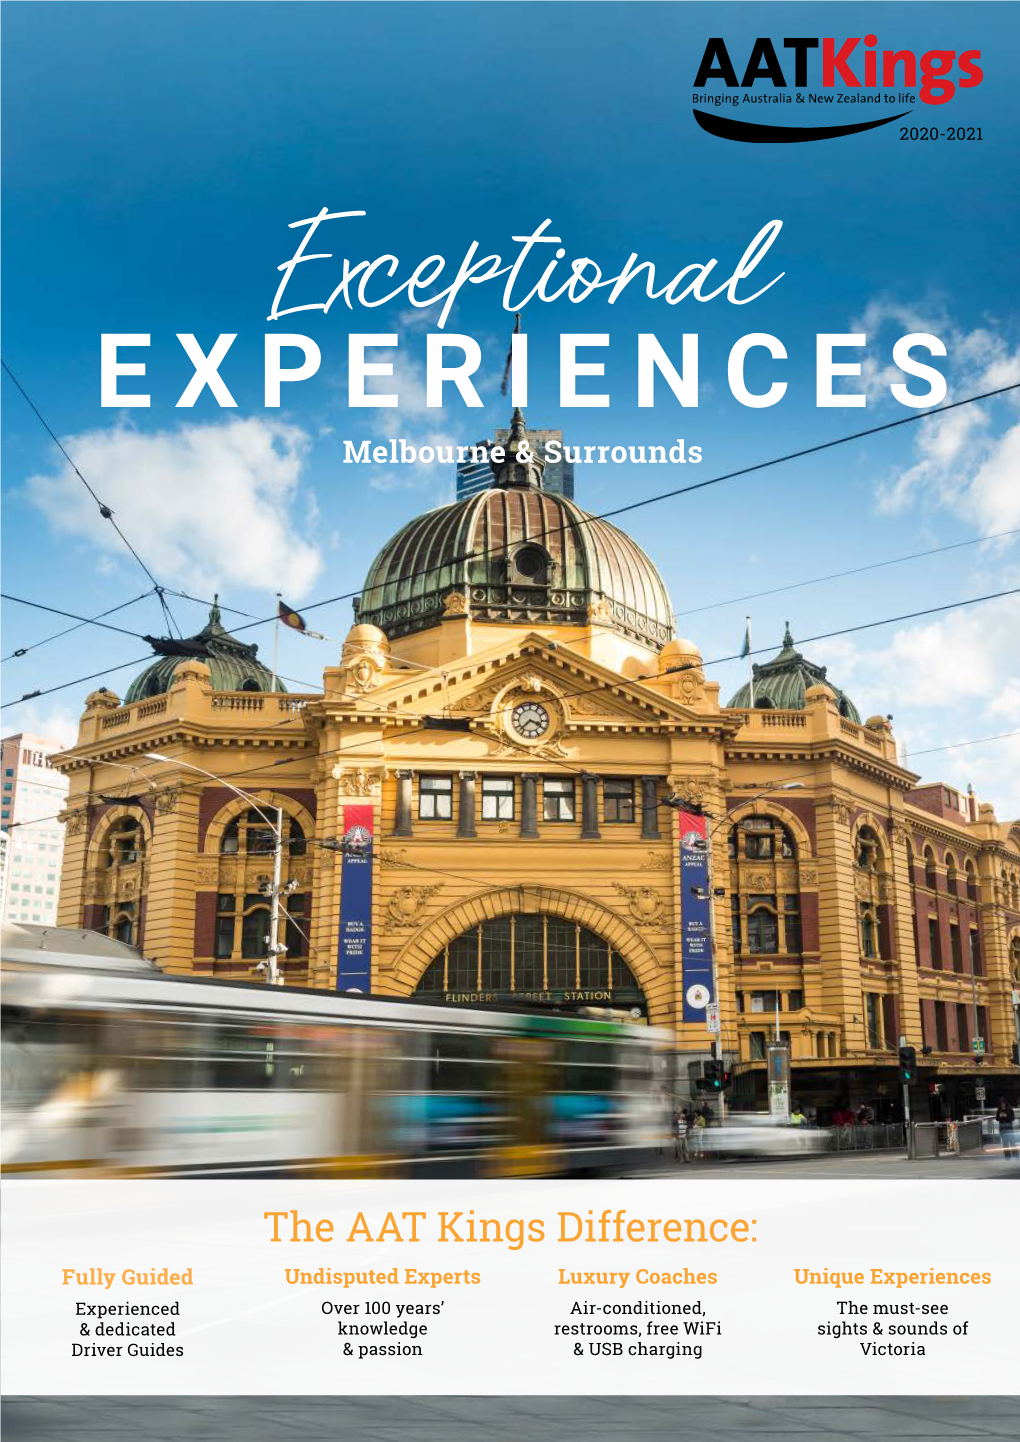 Exceptional EXPERIENCES Melbourne & Surrounds Free Hotel Pick-Ups Please Be Outside the Hotel 5 Minutes Prior to Pick-Up Time